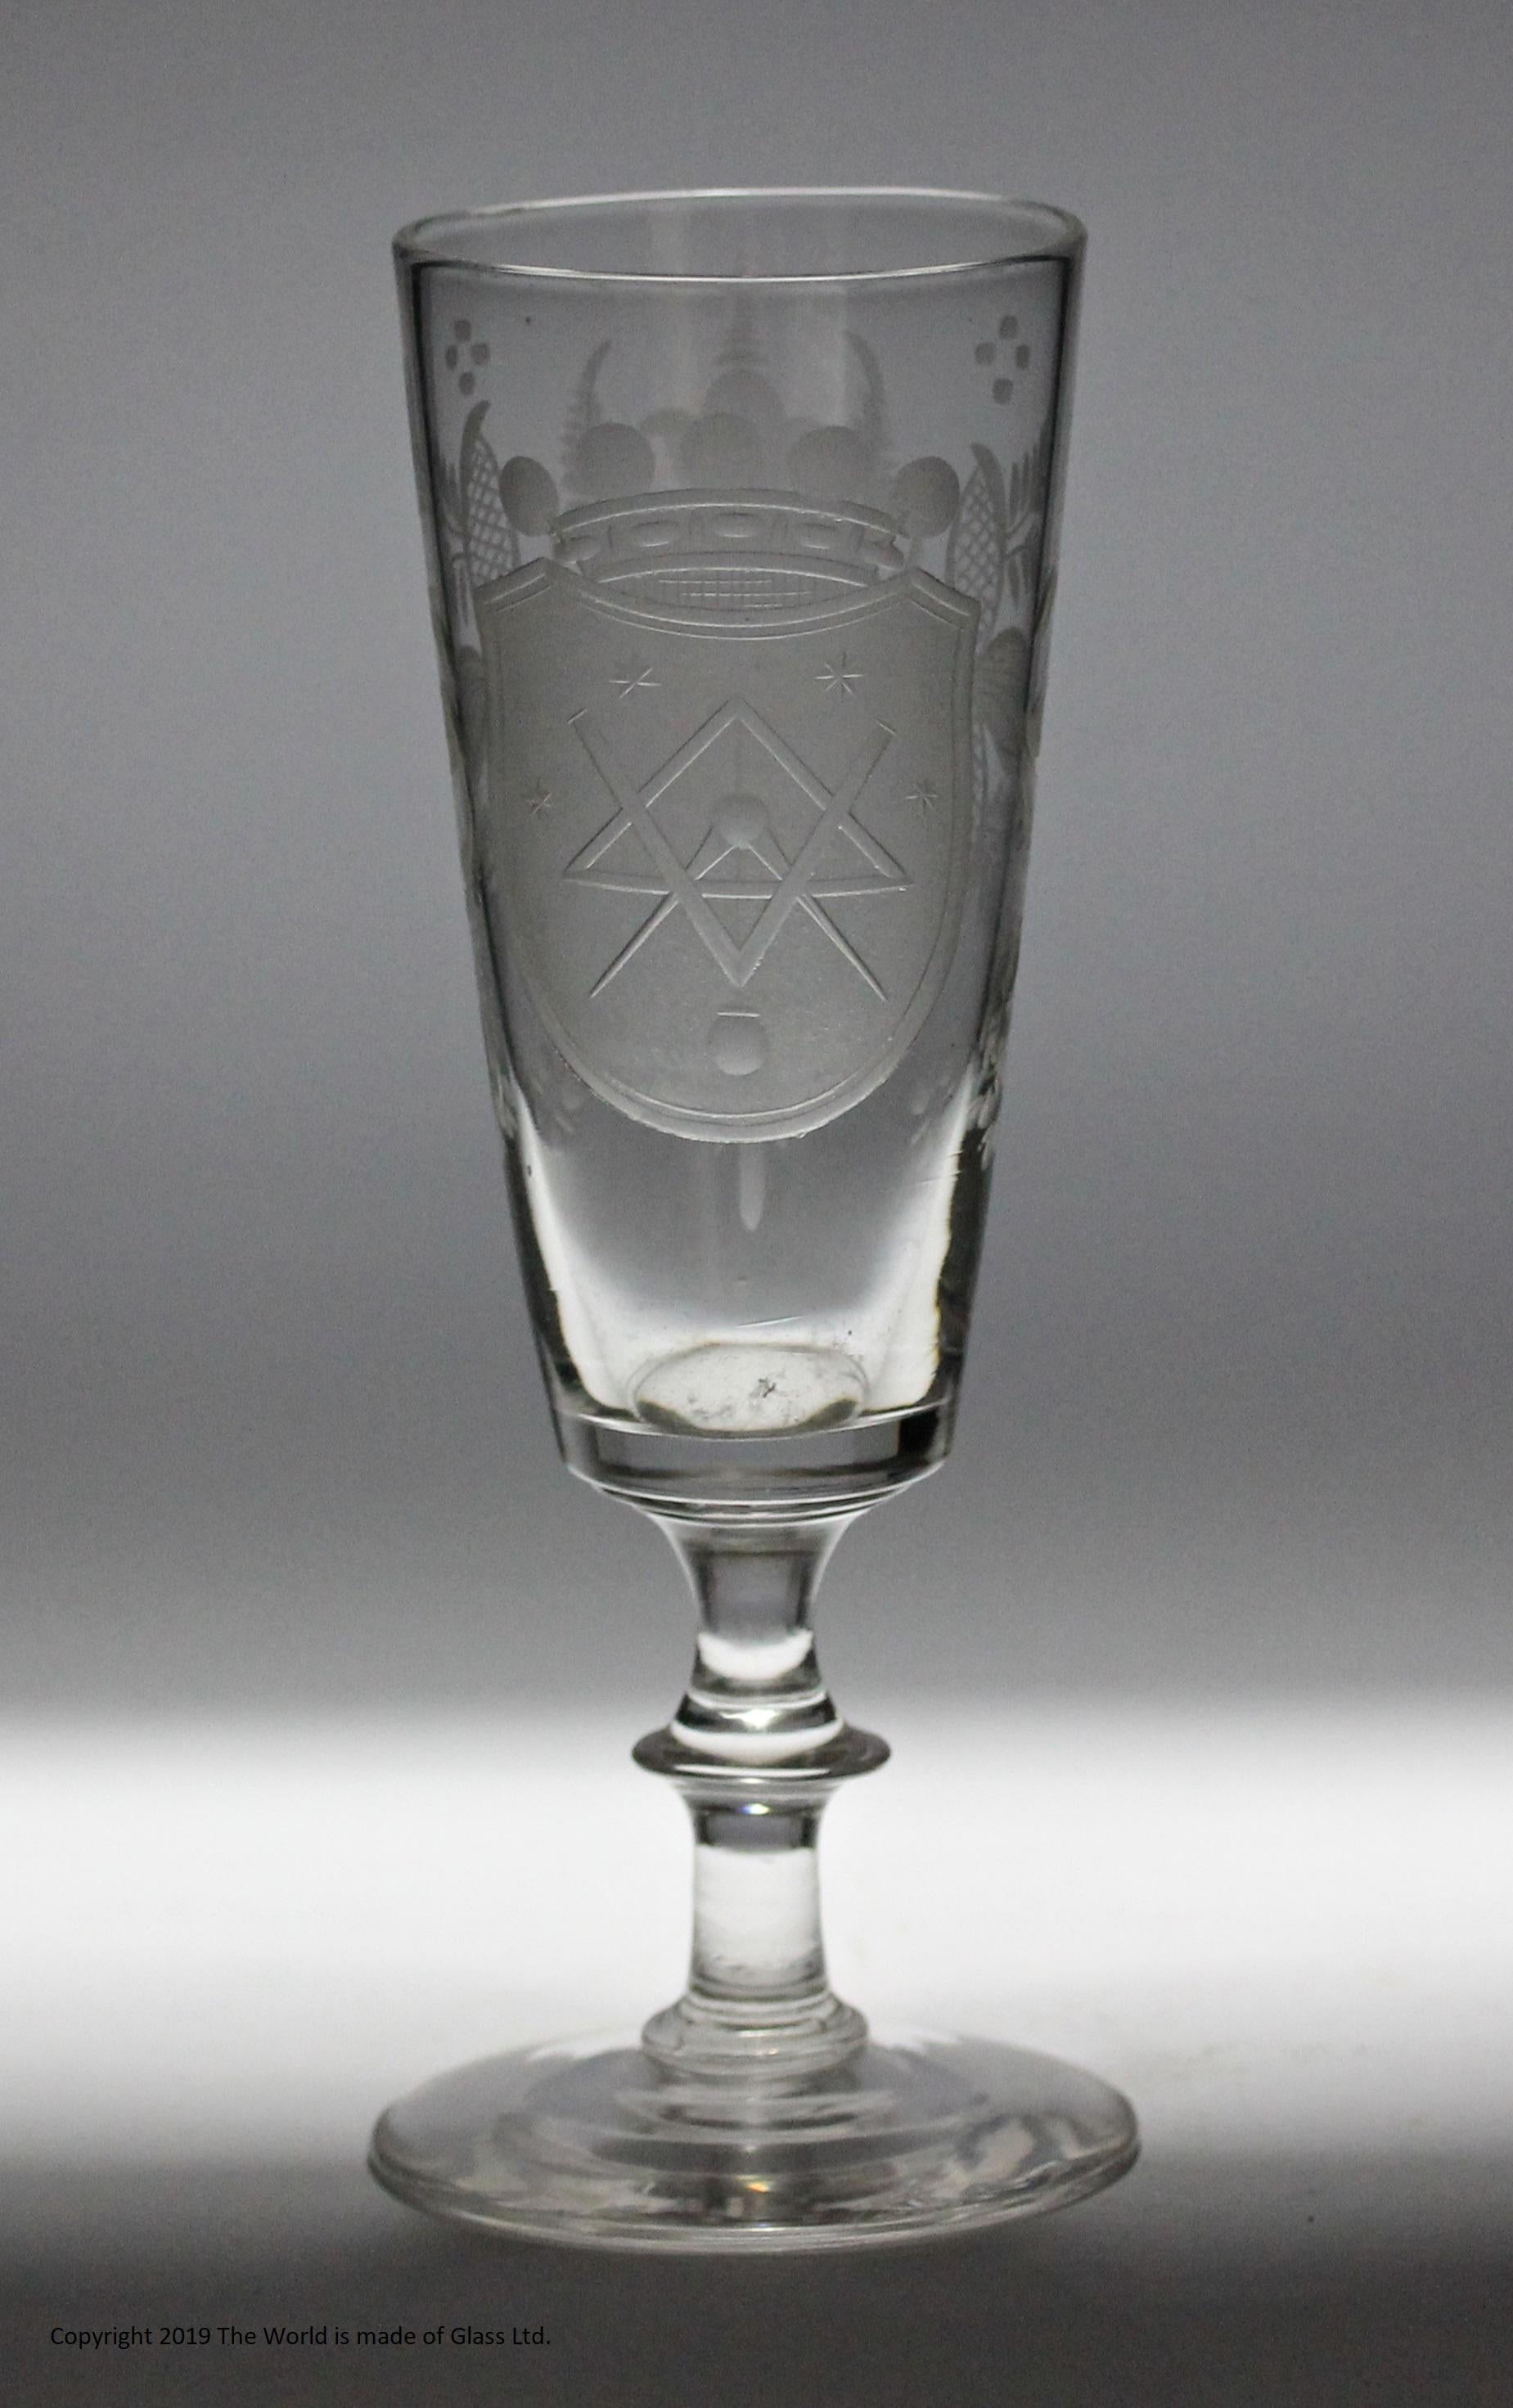 This is a set of five William IV/early Victorian armorial-engraved Masonic ale glasses dating from the beginning to middle of the 19th century, c1835. 

The glasses are in excellent condition for their age. This means, of course, that they show